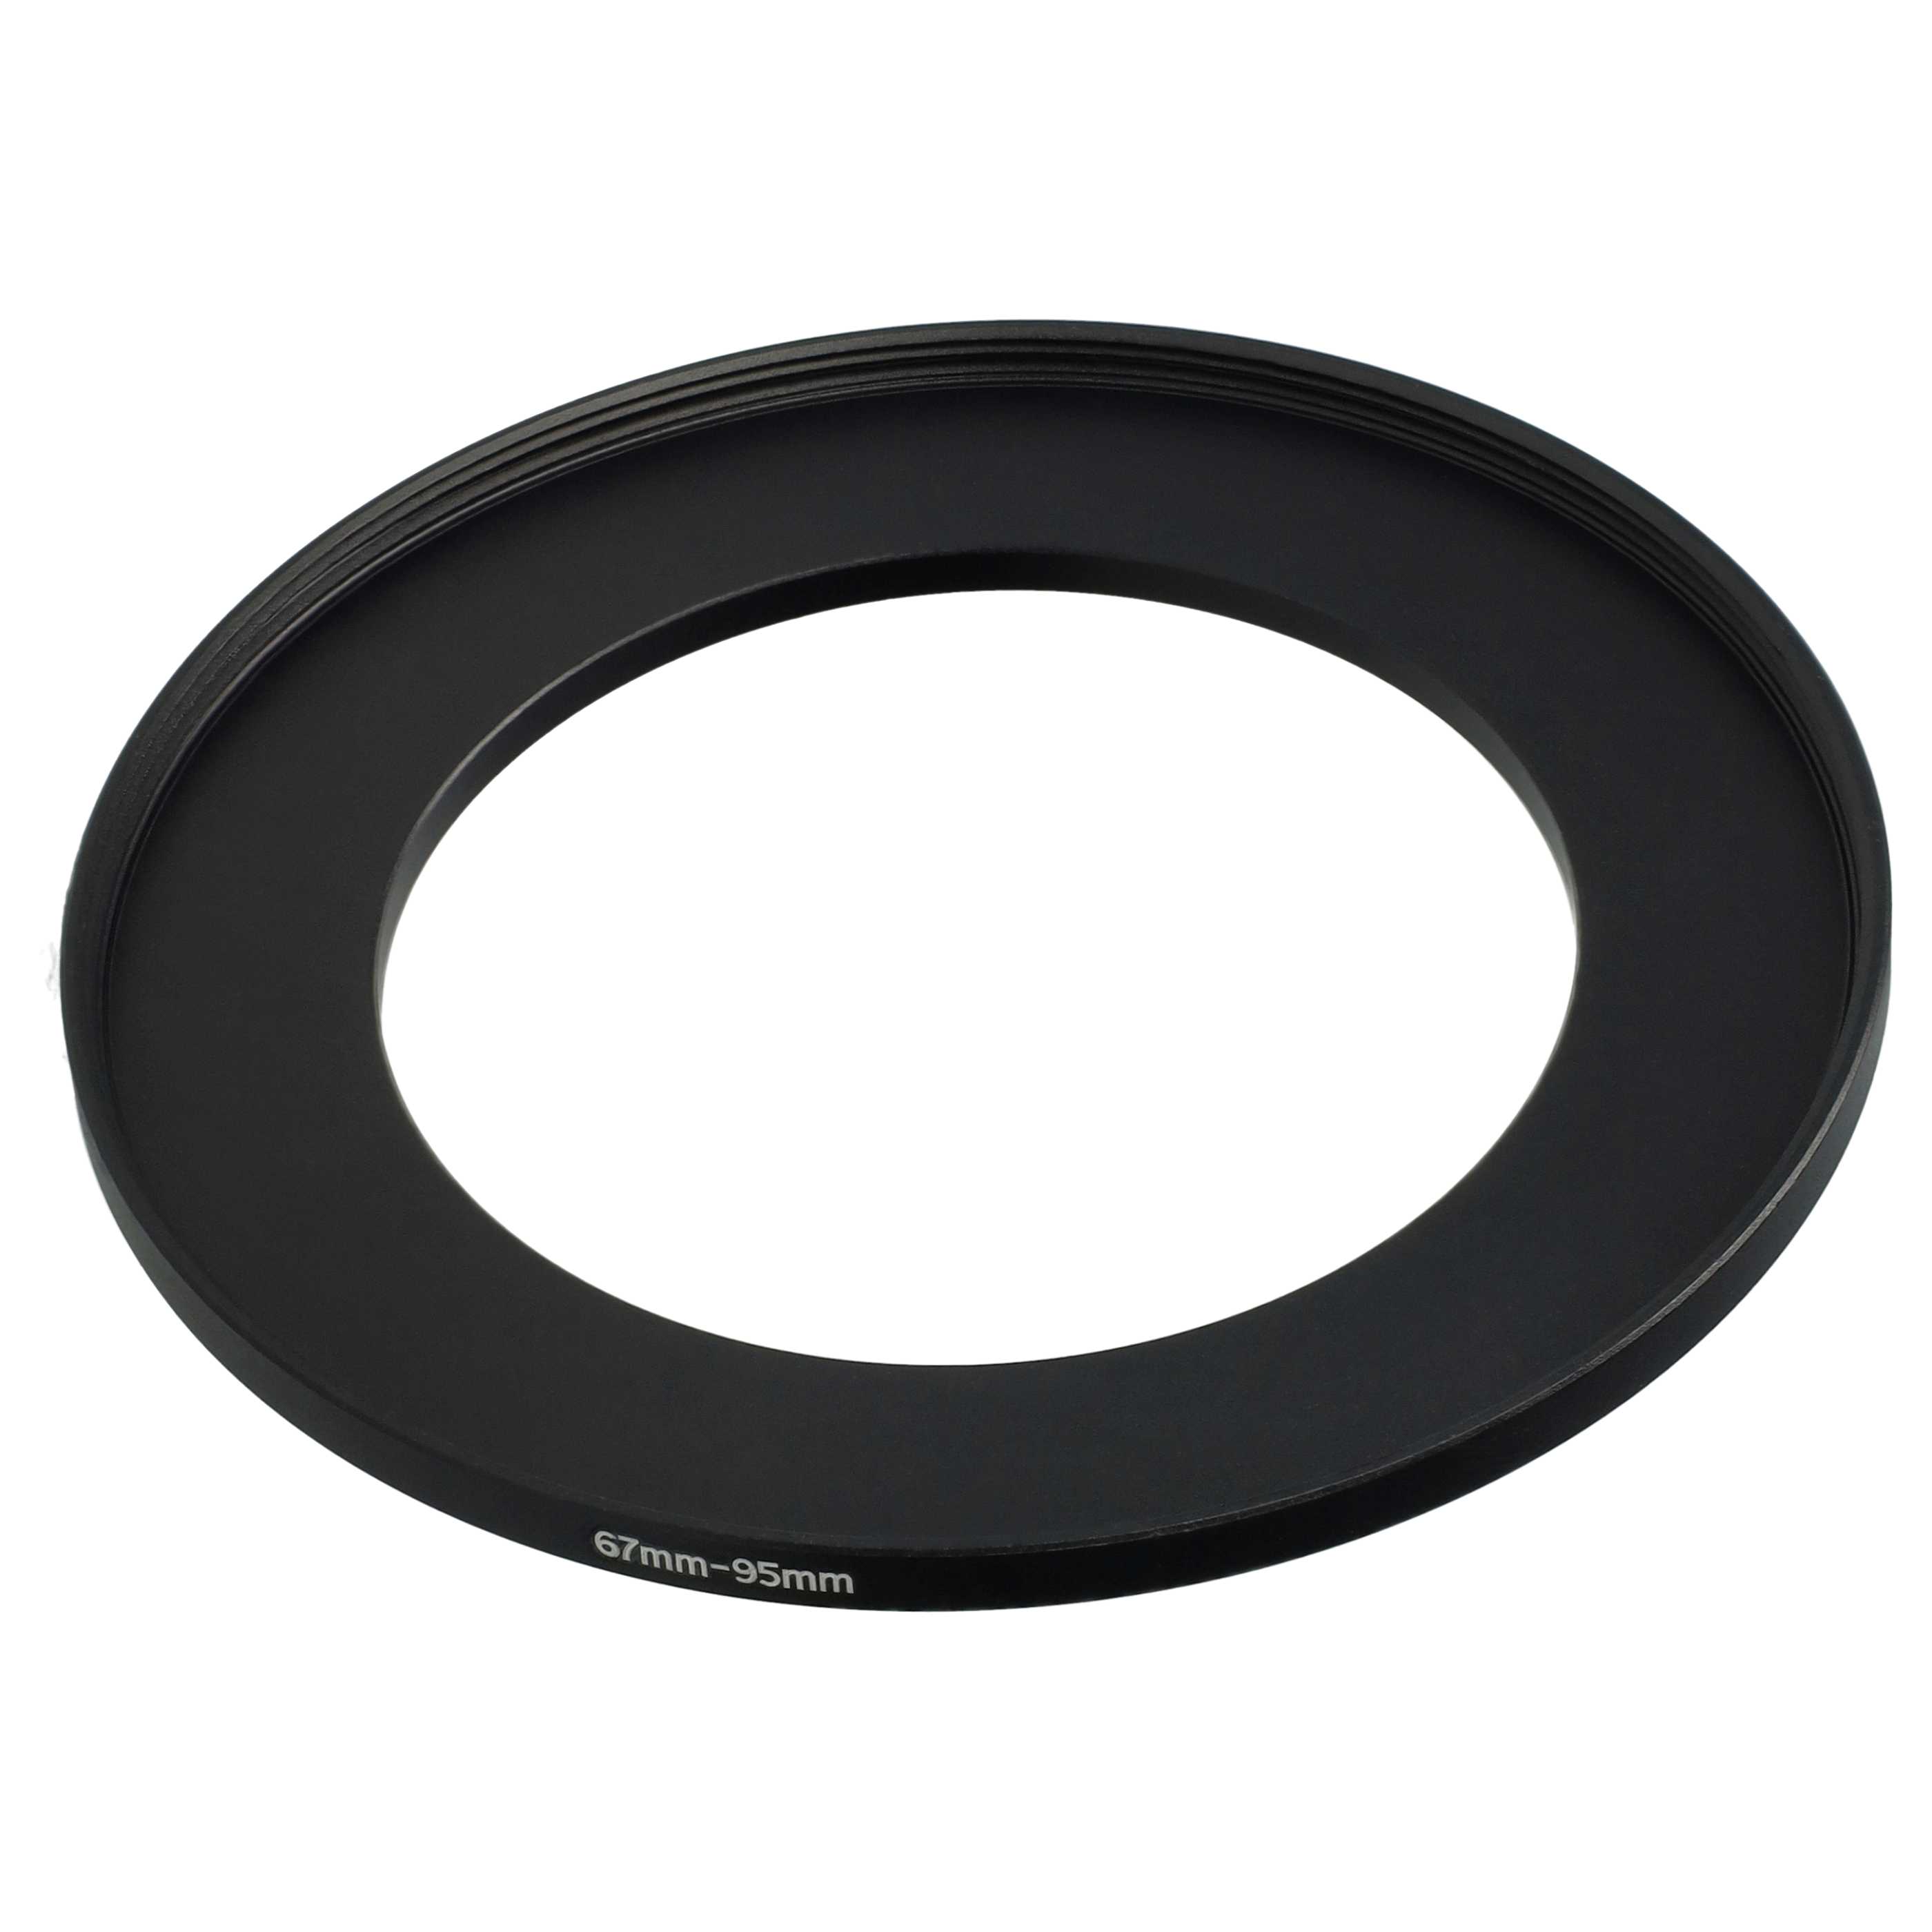 Step-Up Ring Adapter of 67 mm to 95 mmfor various Camera Lens - Filter Adapter